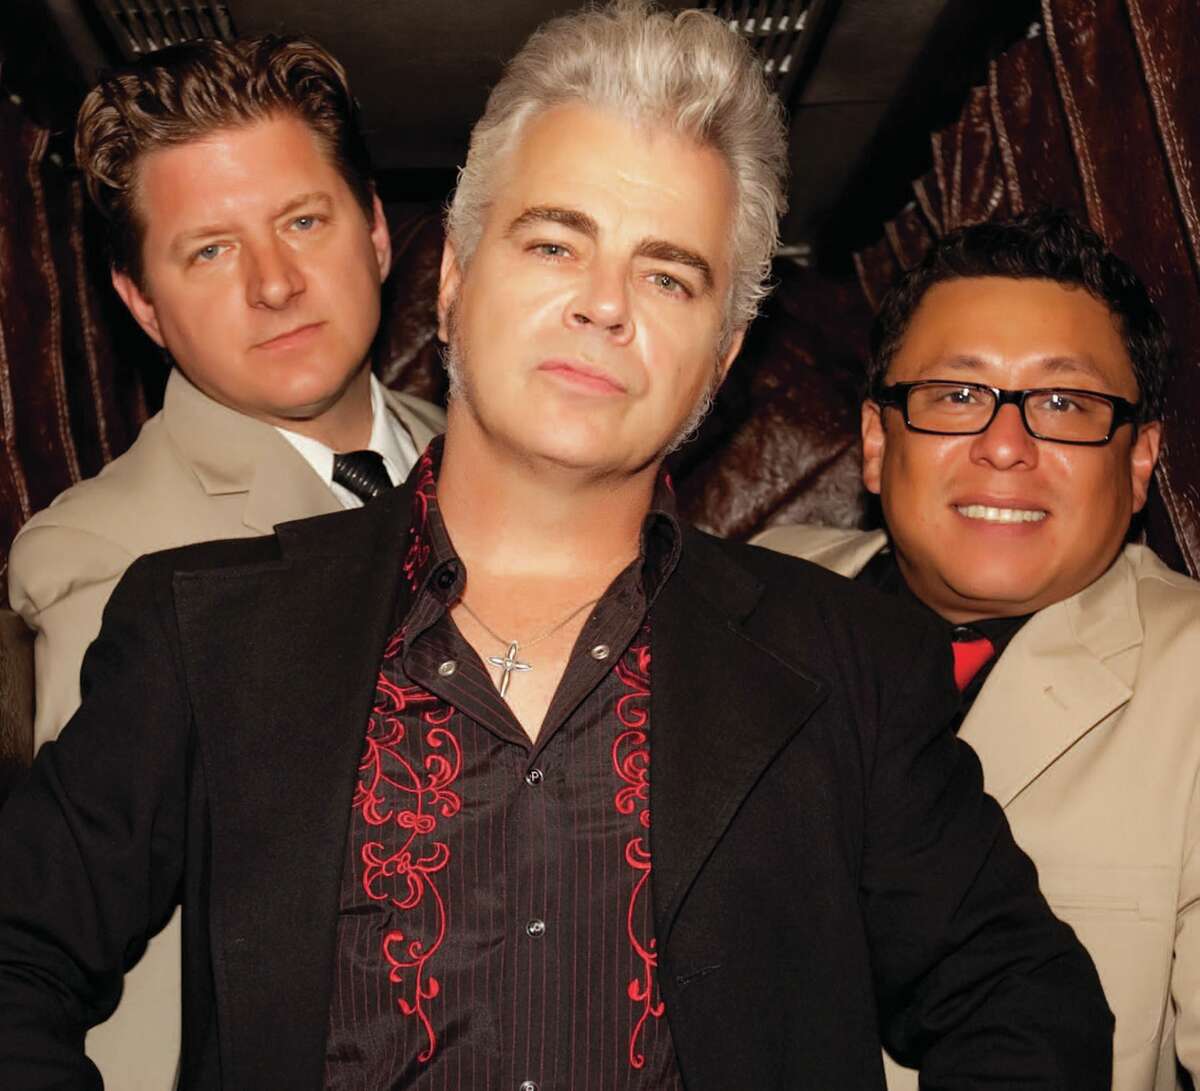 Musician Dale Watson (center) with Chris Crepps, left, and Mike Bernal.